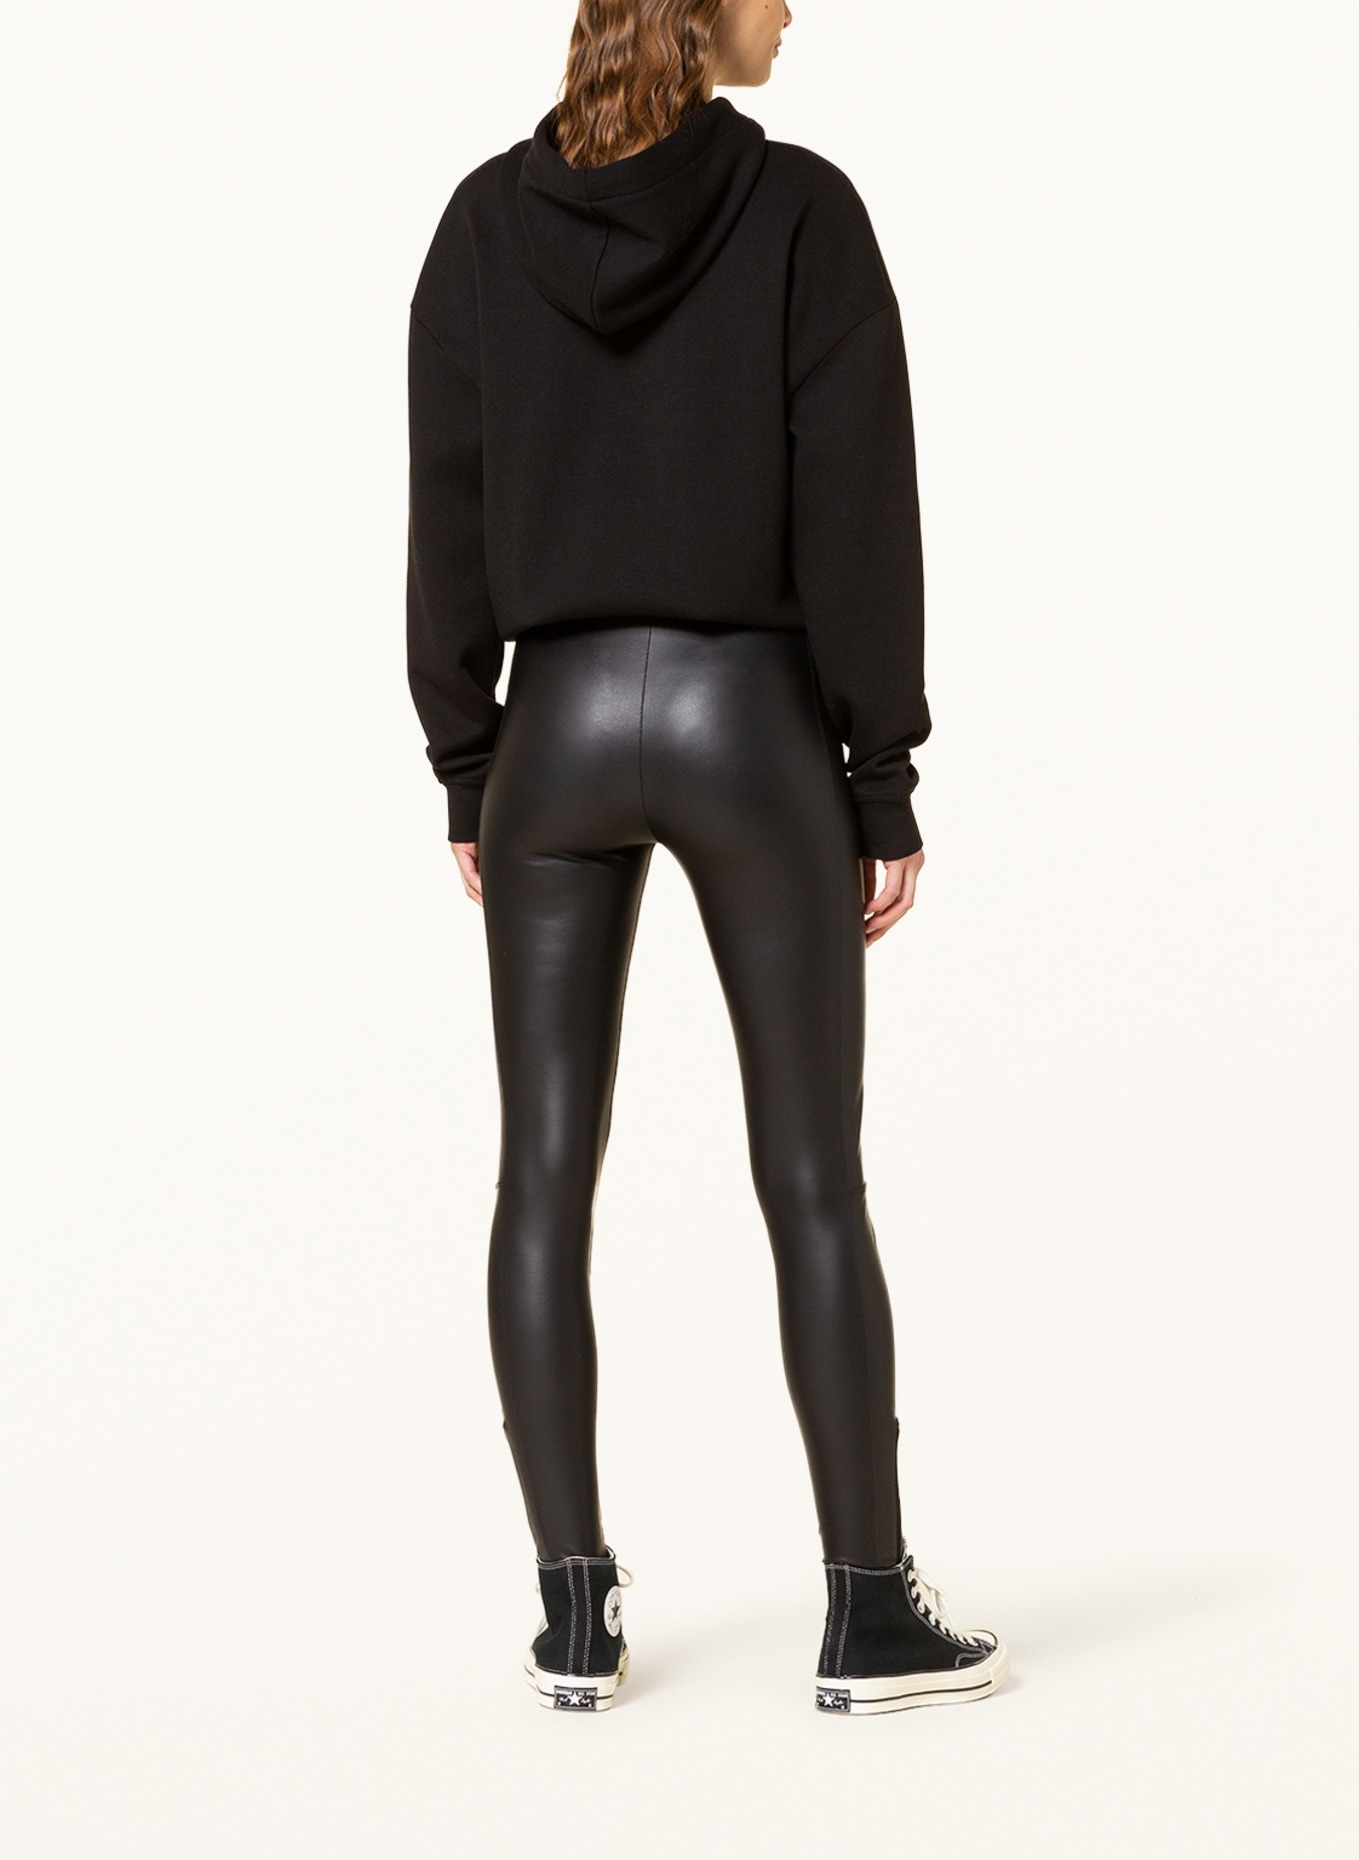 10DAYS 7/8 leggings in leather look, Color: BLACK (Image 3)